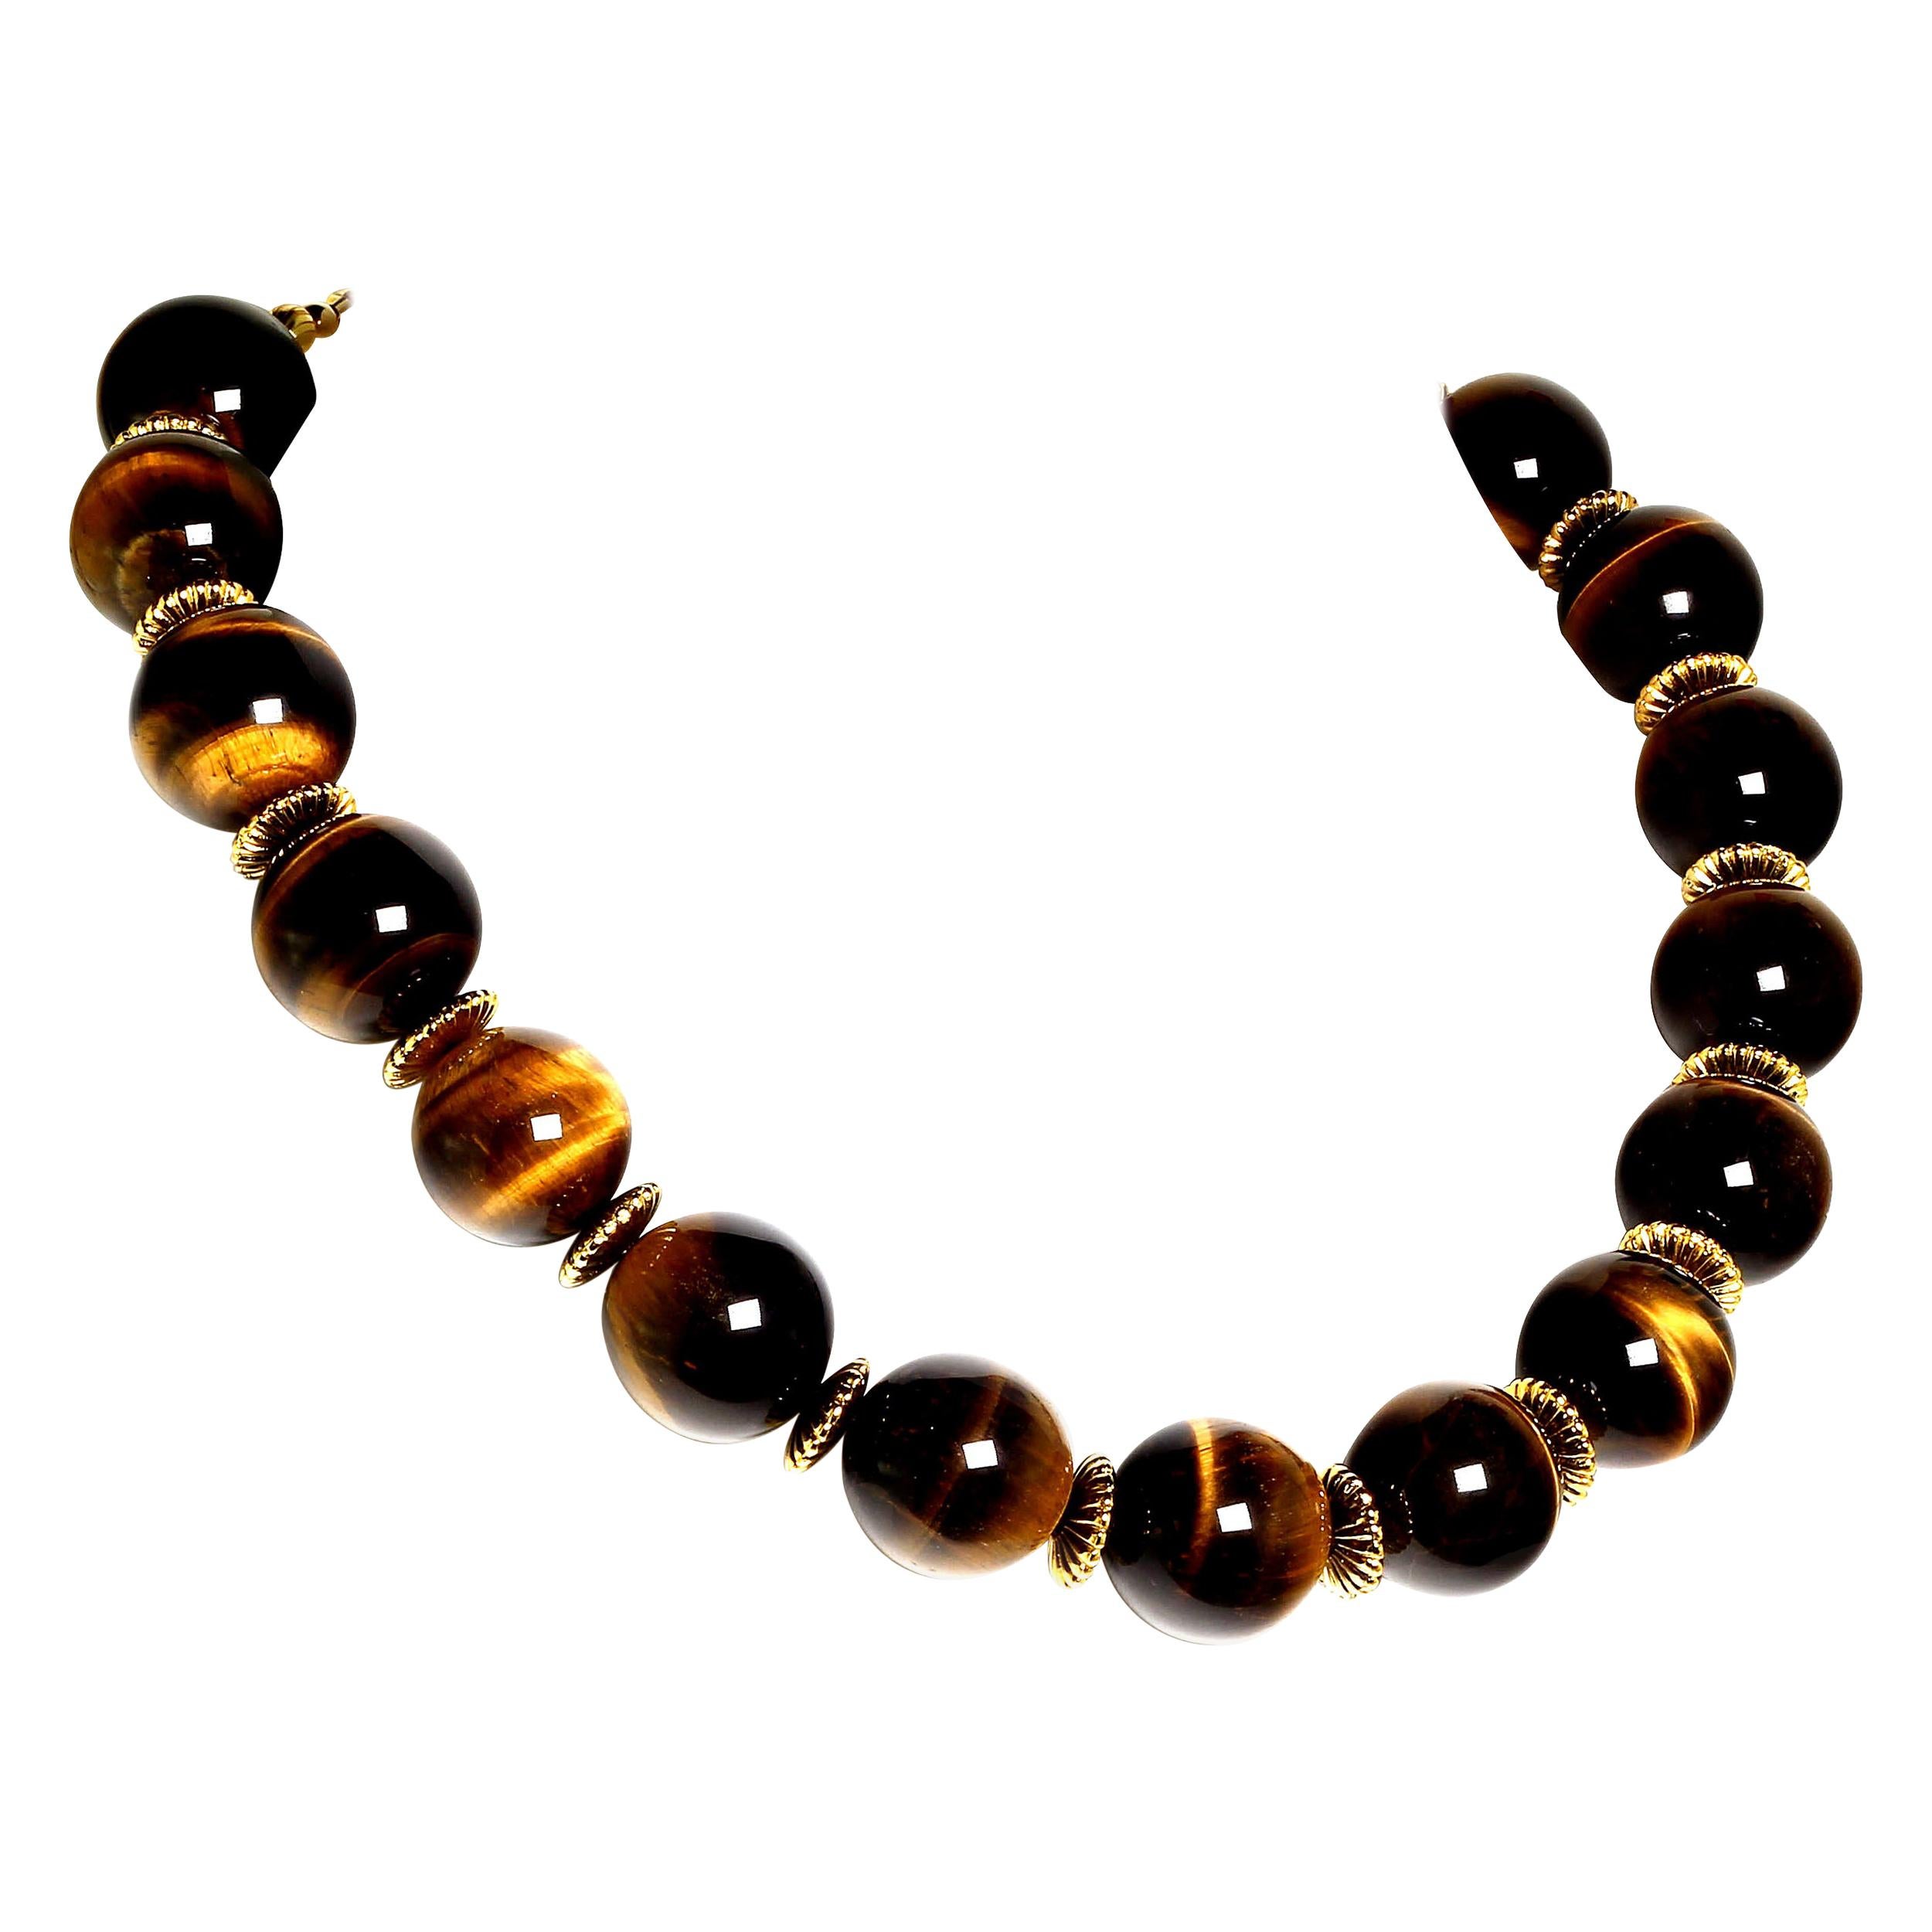 AJD Statement Necklace of Magnificent Glowing Tiger's Eye